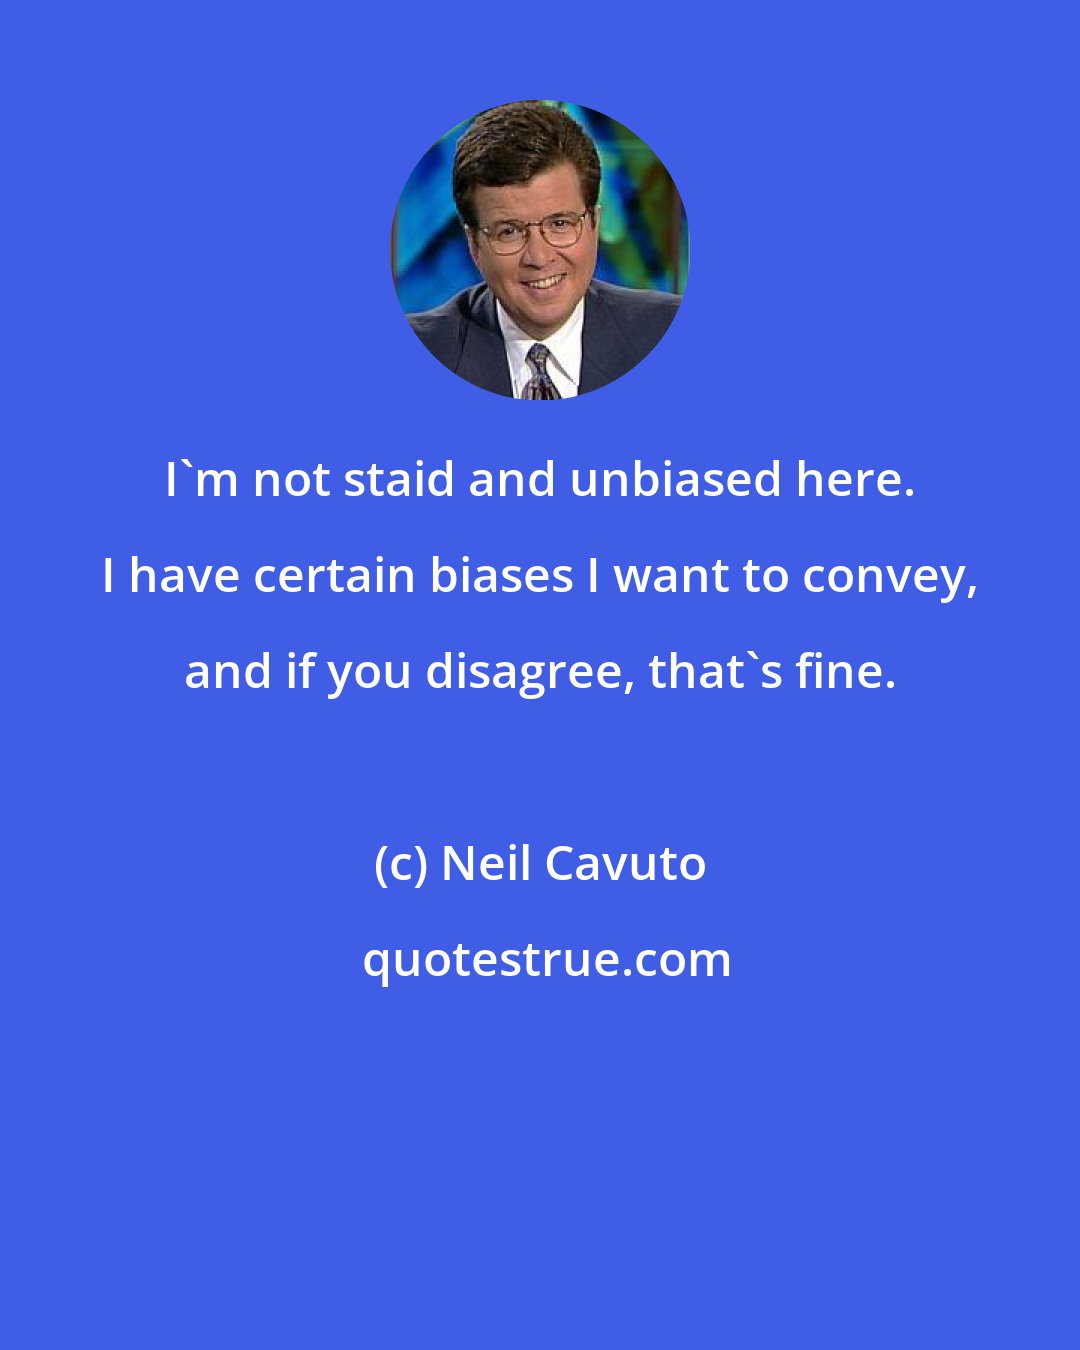 Neil Cavuto: I'm not staid and unbiased here. I have certain biases I want to convey, and if you disagree, that's fine.